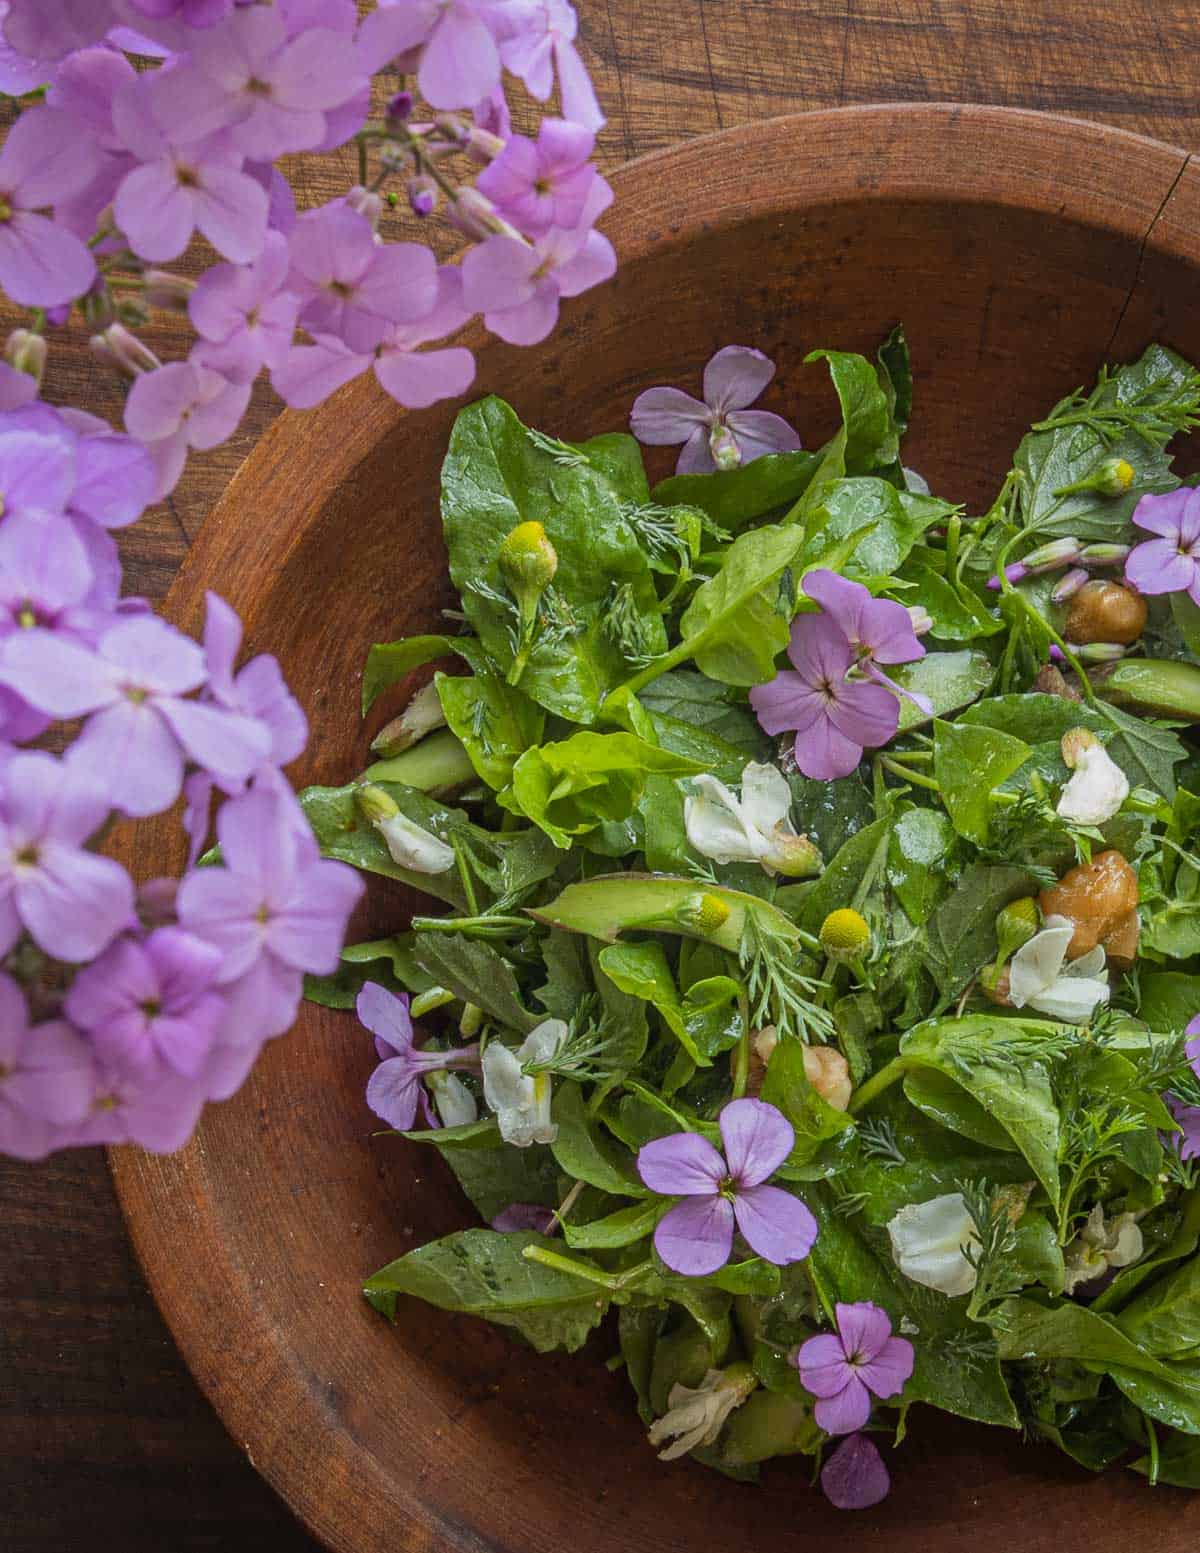 A salad of chickweed and other wild greens with purple dames rocket flowers and pineapple weed flowers.